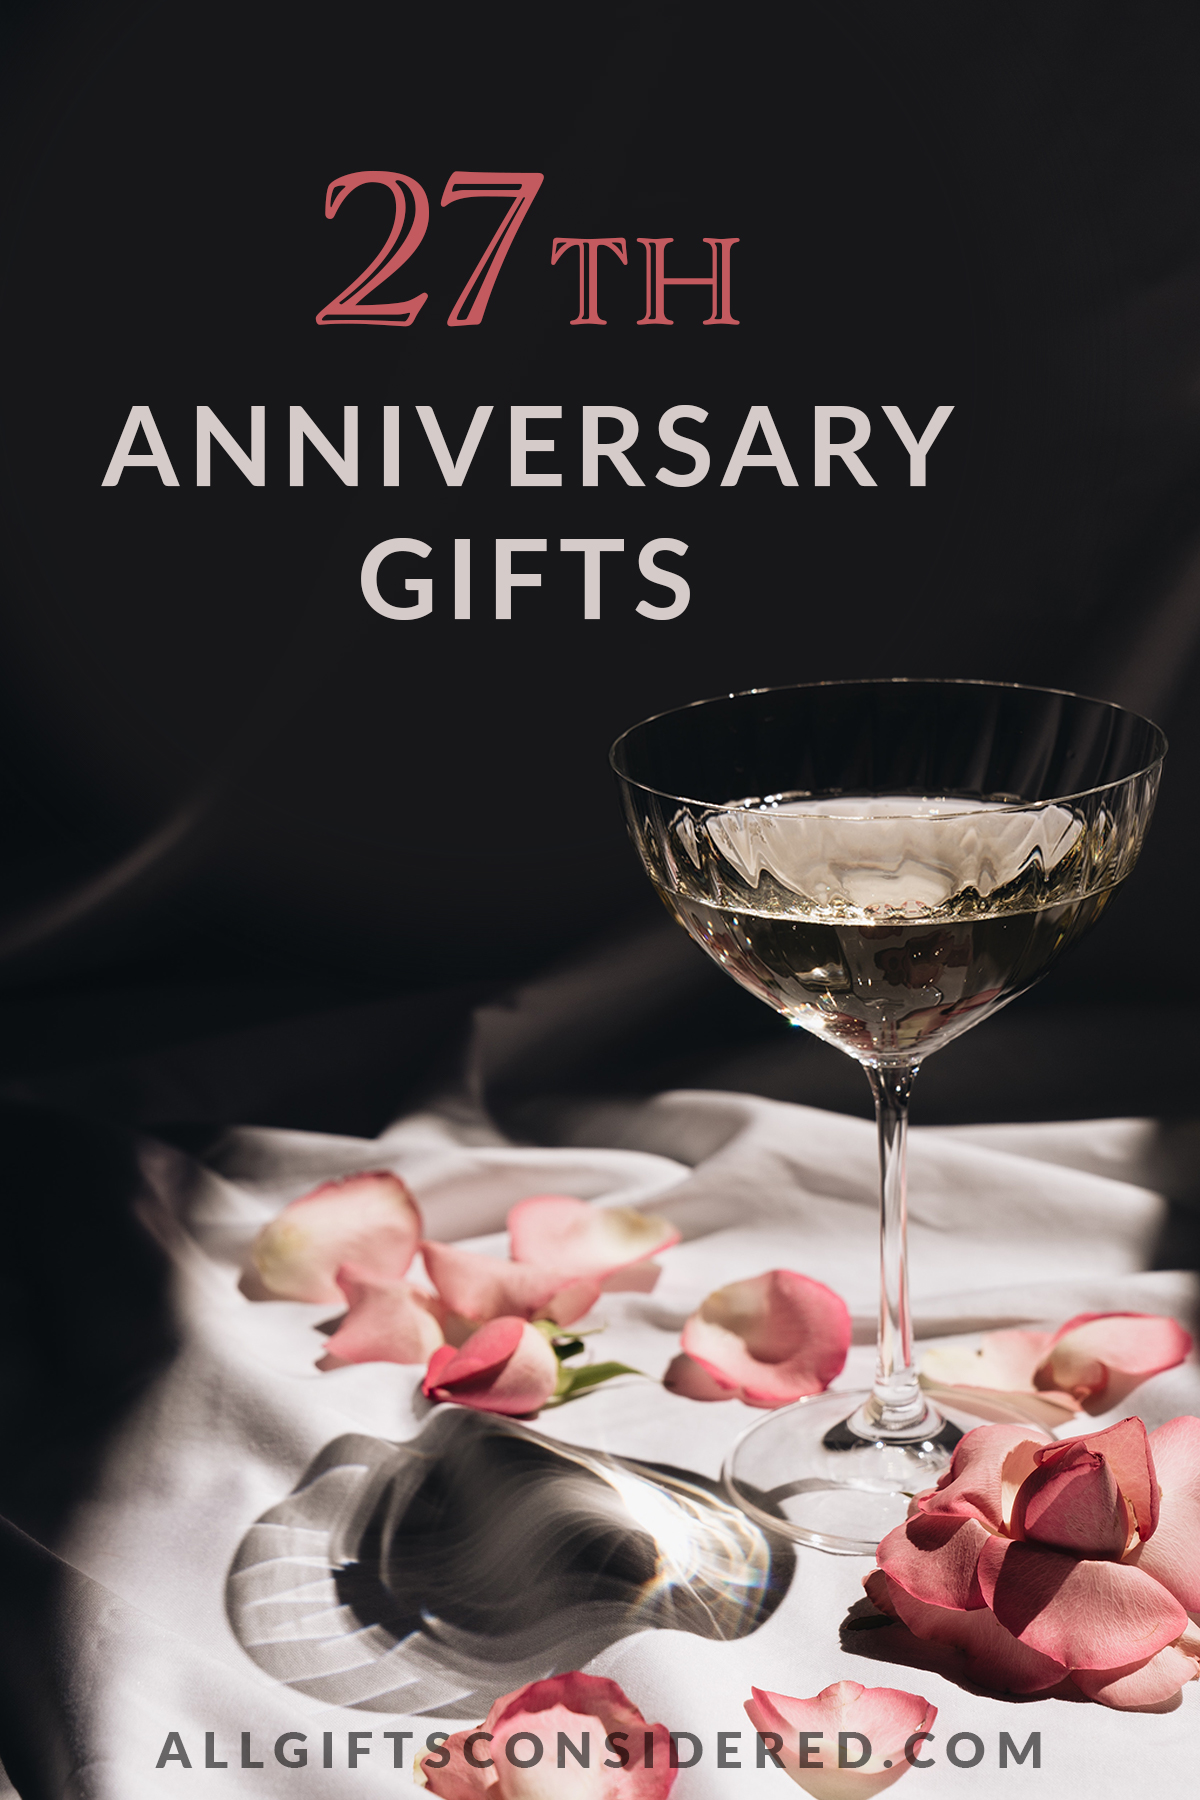 27th Anniversary Gifts - feature image